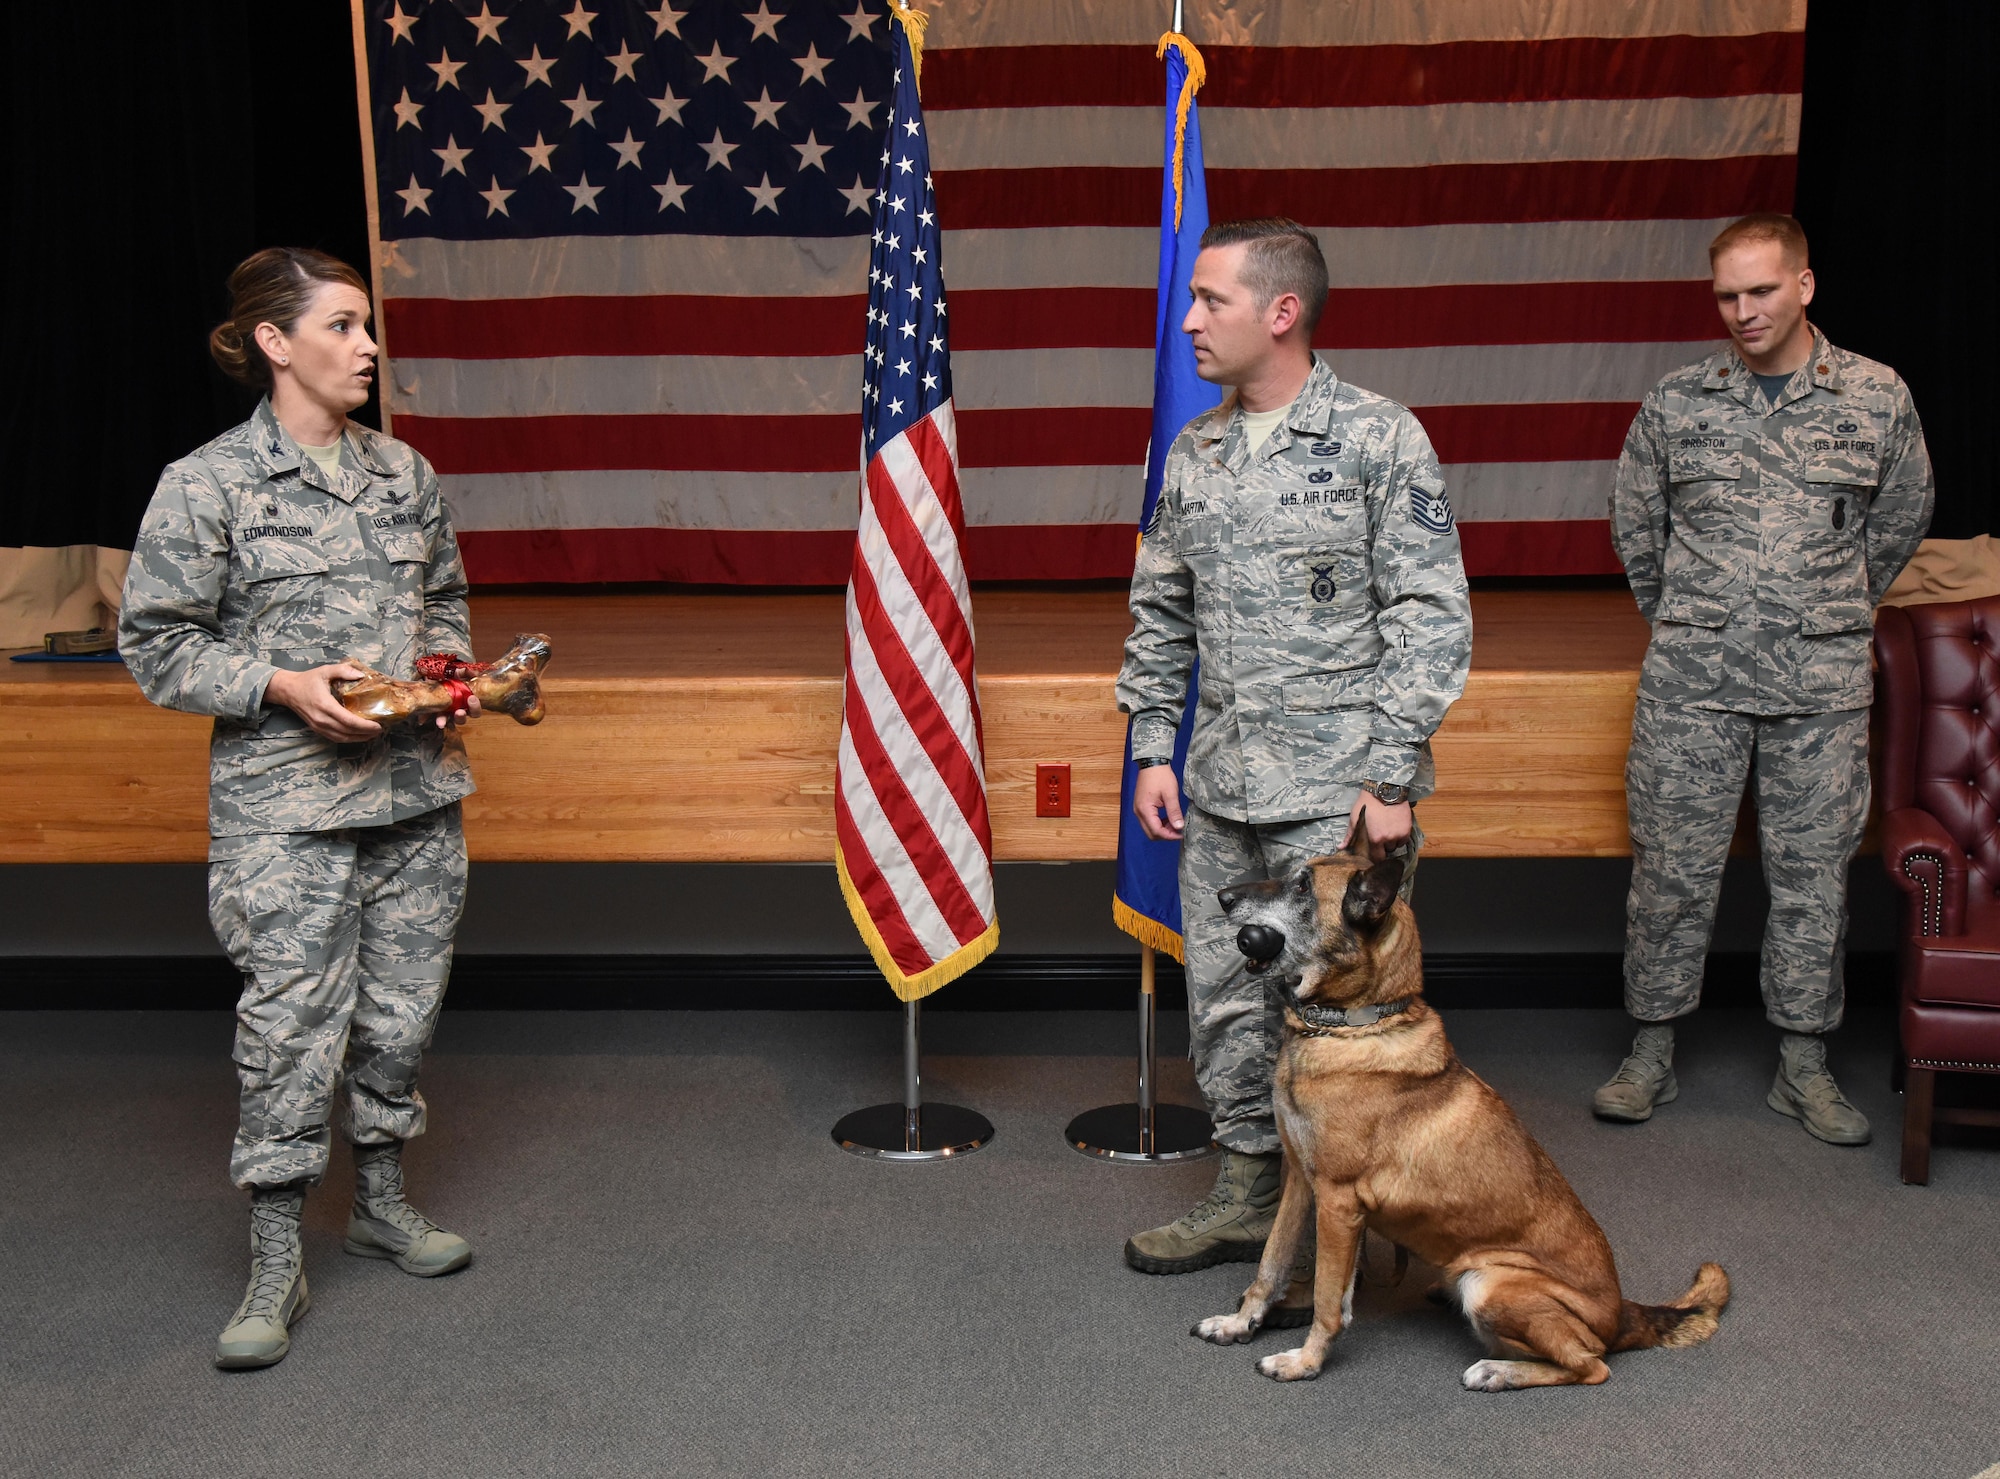 Col. Michele Edmondson, 81st Training Wing commander, delivers remarks to Tech. Sgt. James Martin III, 81st Security Forces Squadron charlie flight flight chief, and Densy, 81st SFS military working dog, during Densy’s retirement ceremony at the Keesler Medical Center Don Wylie Auditorium Dec. 2, 2016, on Keesler Air Force Base, Miss. Densy served more than nine years in the Air Force. After serving together for two years, to include one deployment, Martin adopted Densy. (U.S. Air Force photo by Kemberly Groue)